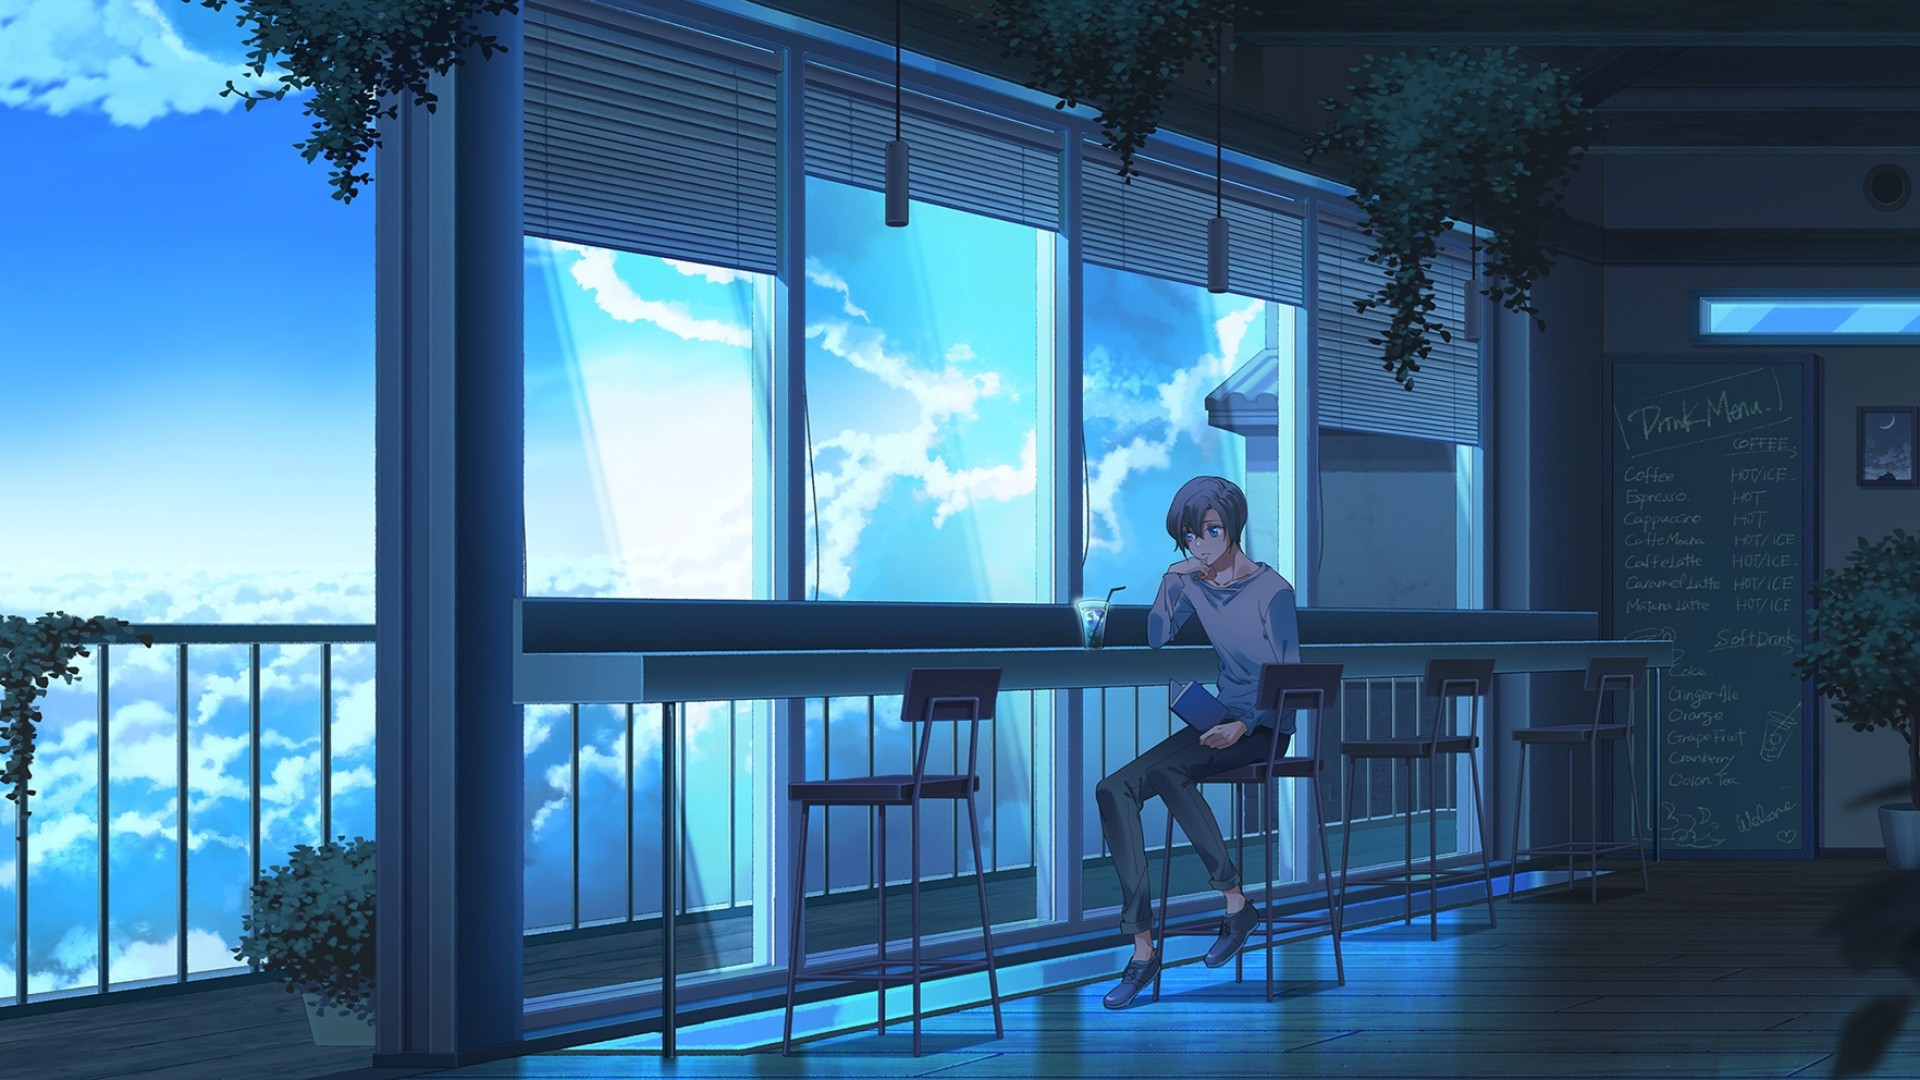 Download 1920x1080 Anime Boy, Cafe, Clouds, Balcony Wallpaper for Widescreen